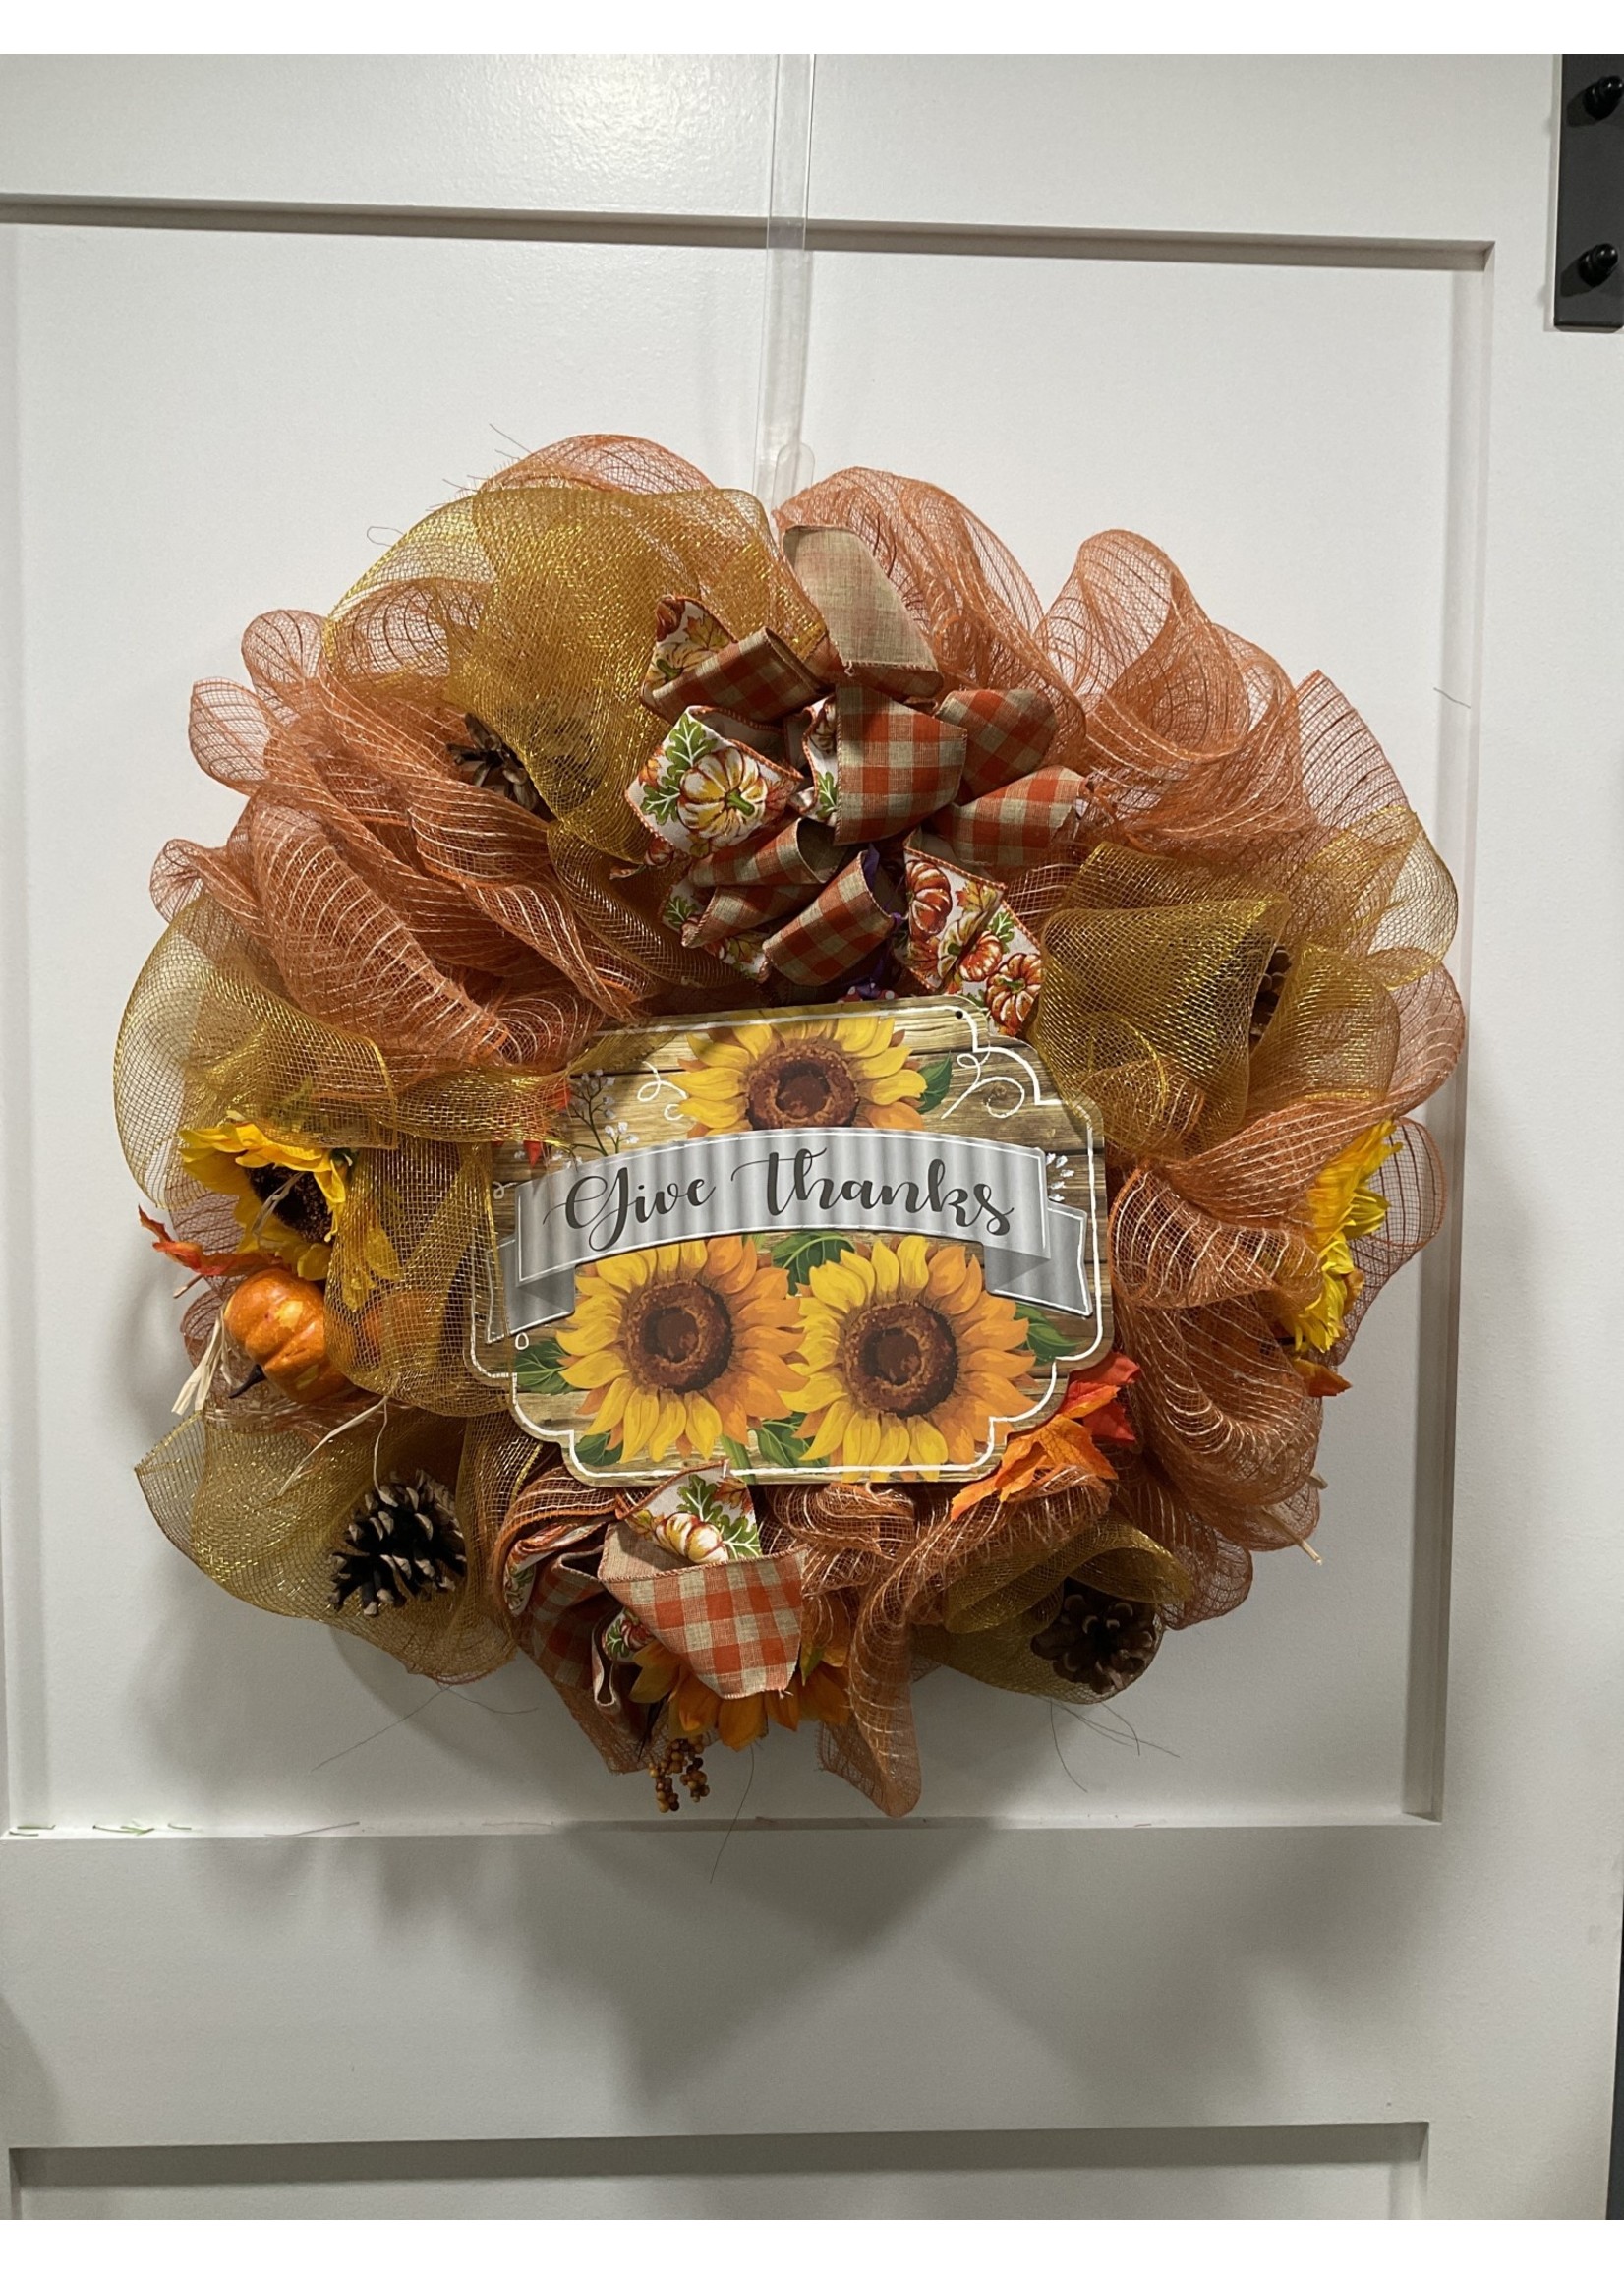 My New Favorite Thing Wreath Mesh 28 in-Orange and Gold "Give Thanks" w/Sunflowers and Orange Check and Pumpkin Ribbons